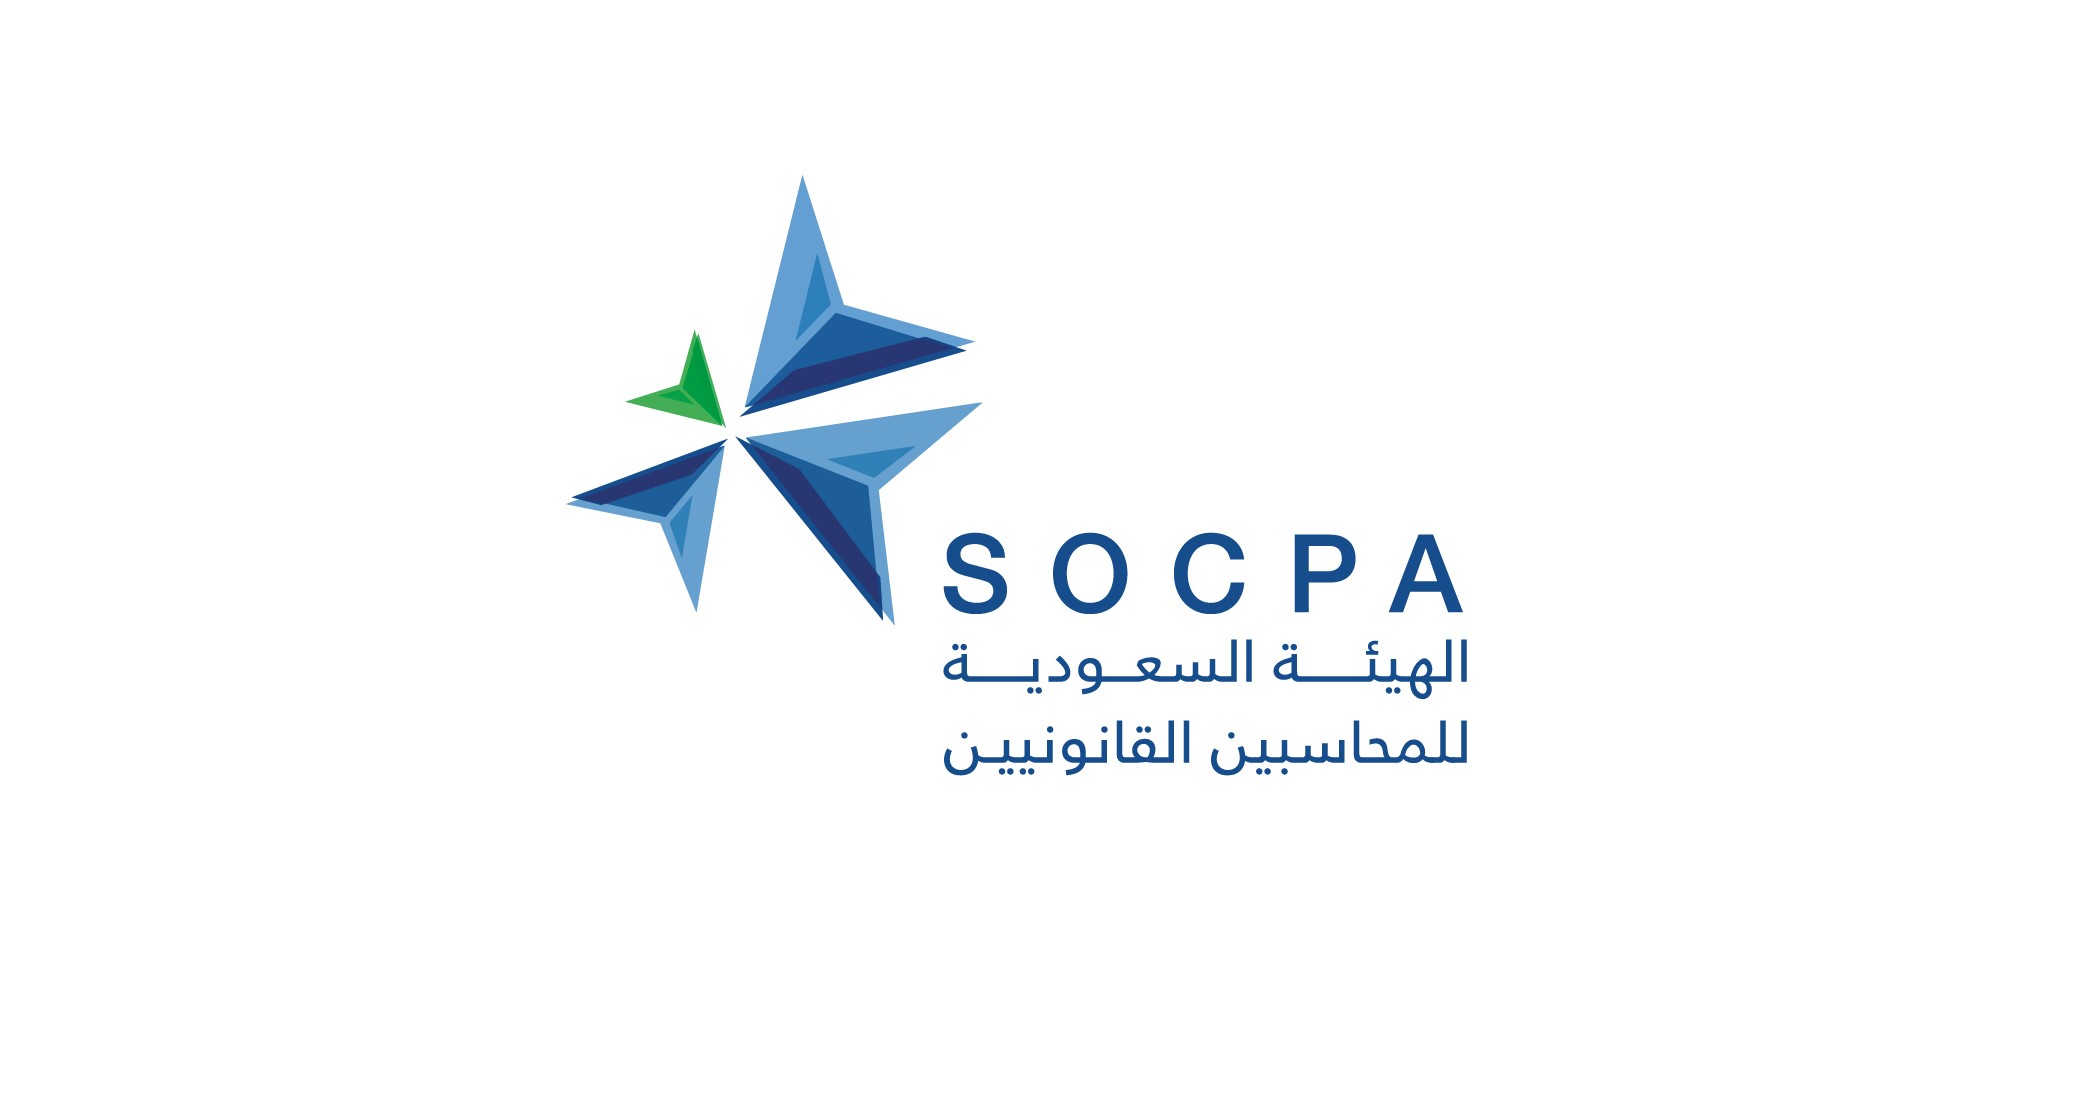 SOCPA and the General Authority of Customs Hold a Workshop on the Standard on Related Services 4400